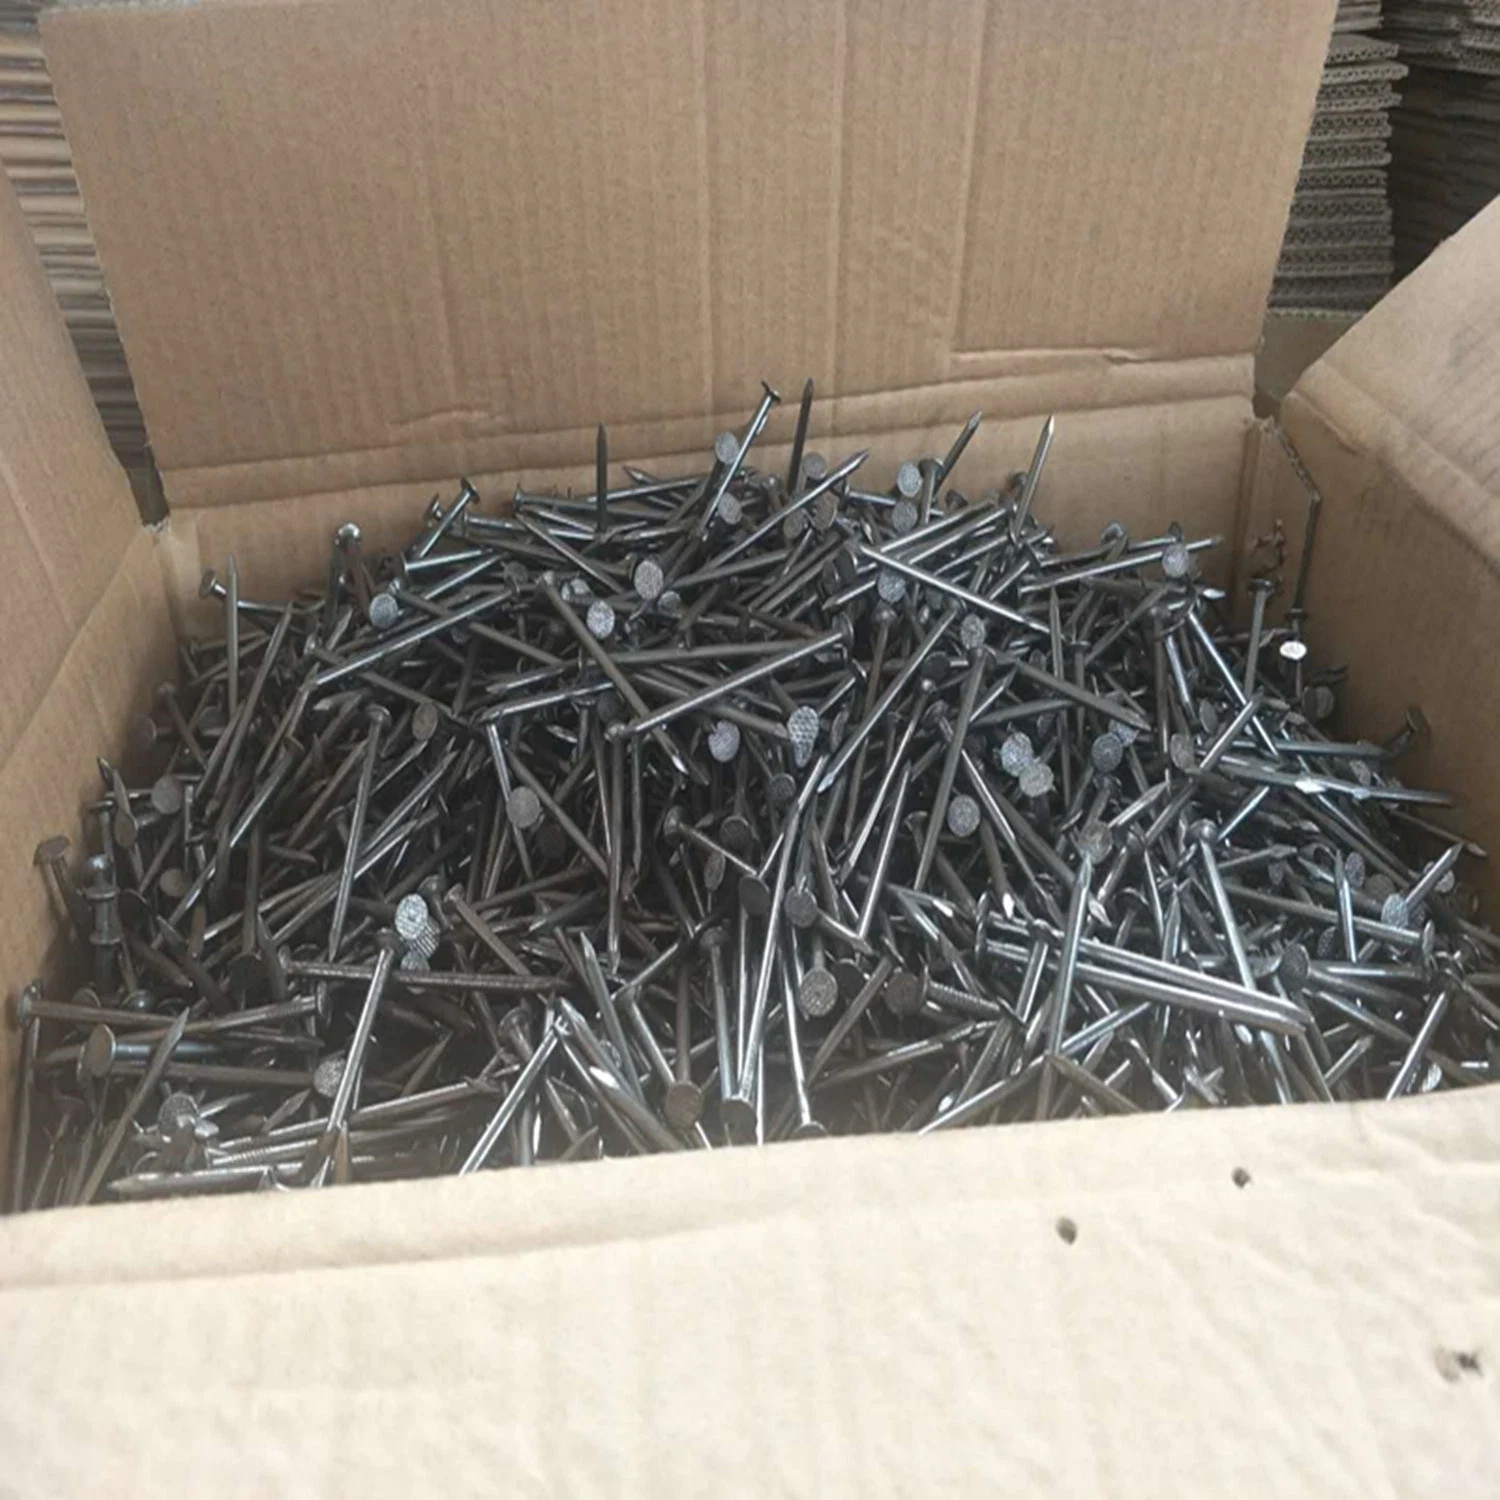 Q195 Very Good Price Polished Nail/Galvanized Common Iron Nail/ Wire Nail/Wooden Nail/Roofing Nail/Concrete Nail for Construction 1&prime; &prime;